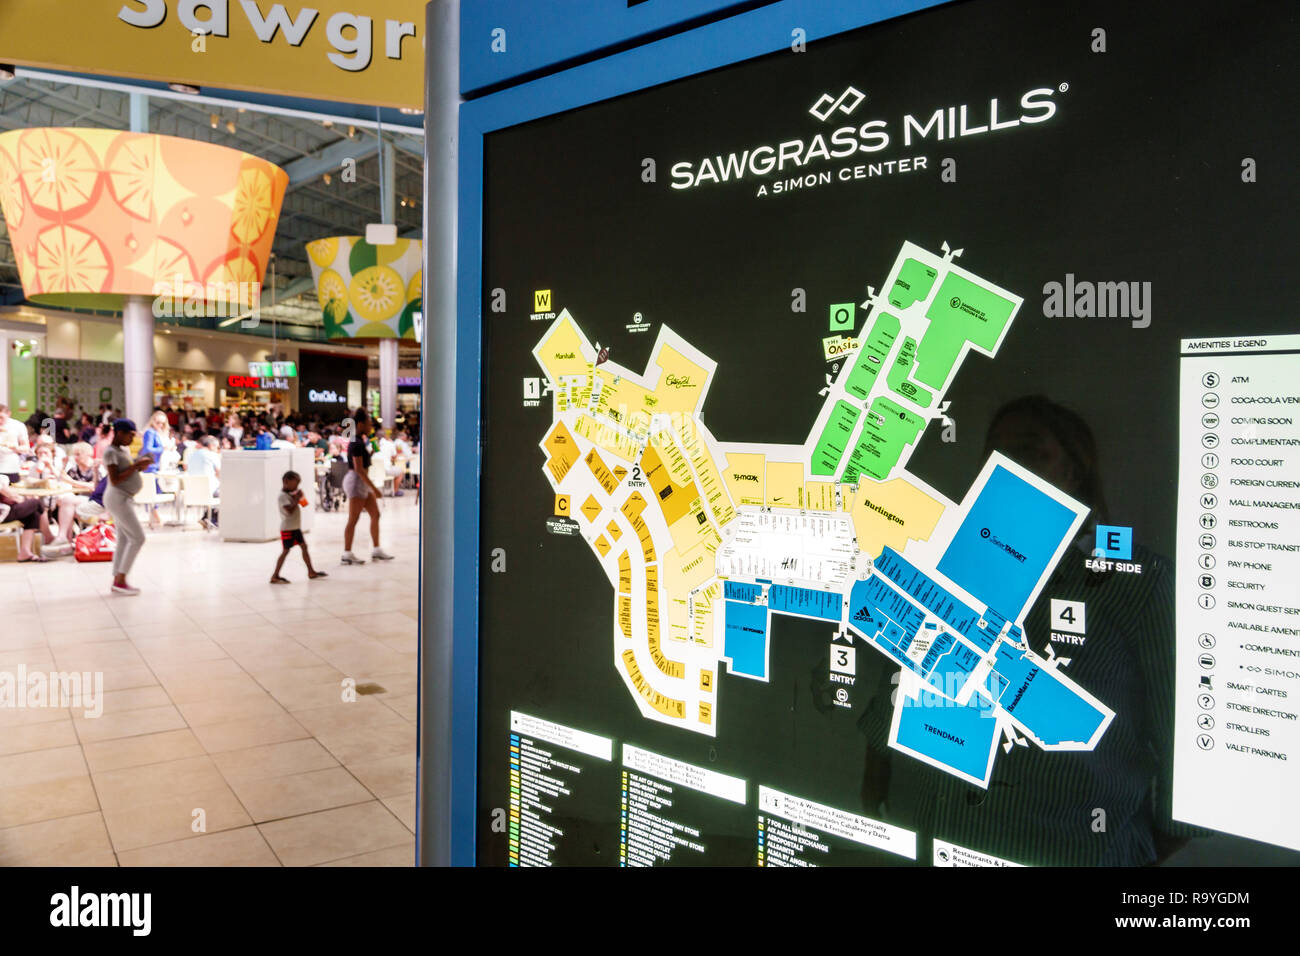 Mall Directory High Resolution Stock Photography and Images - Alamy